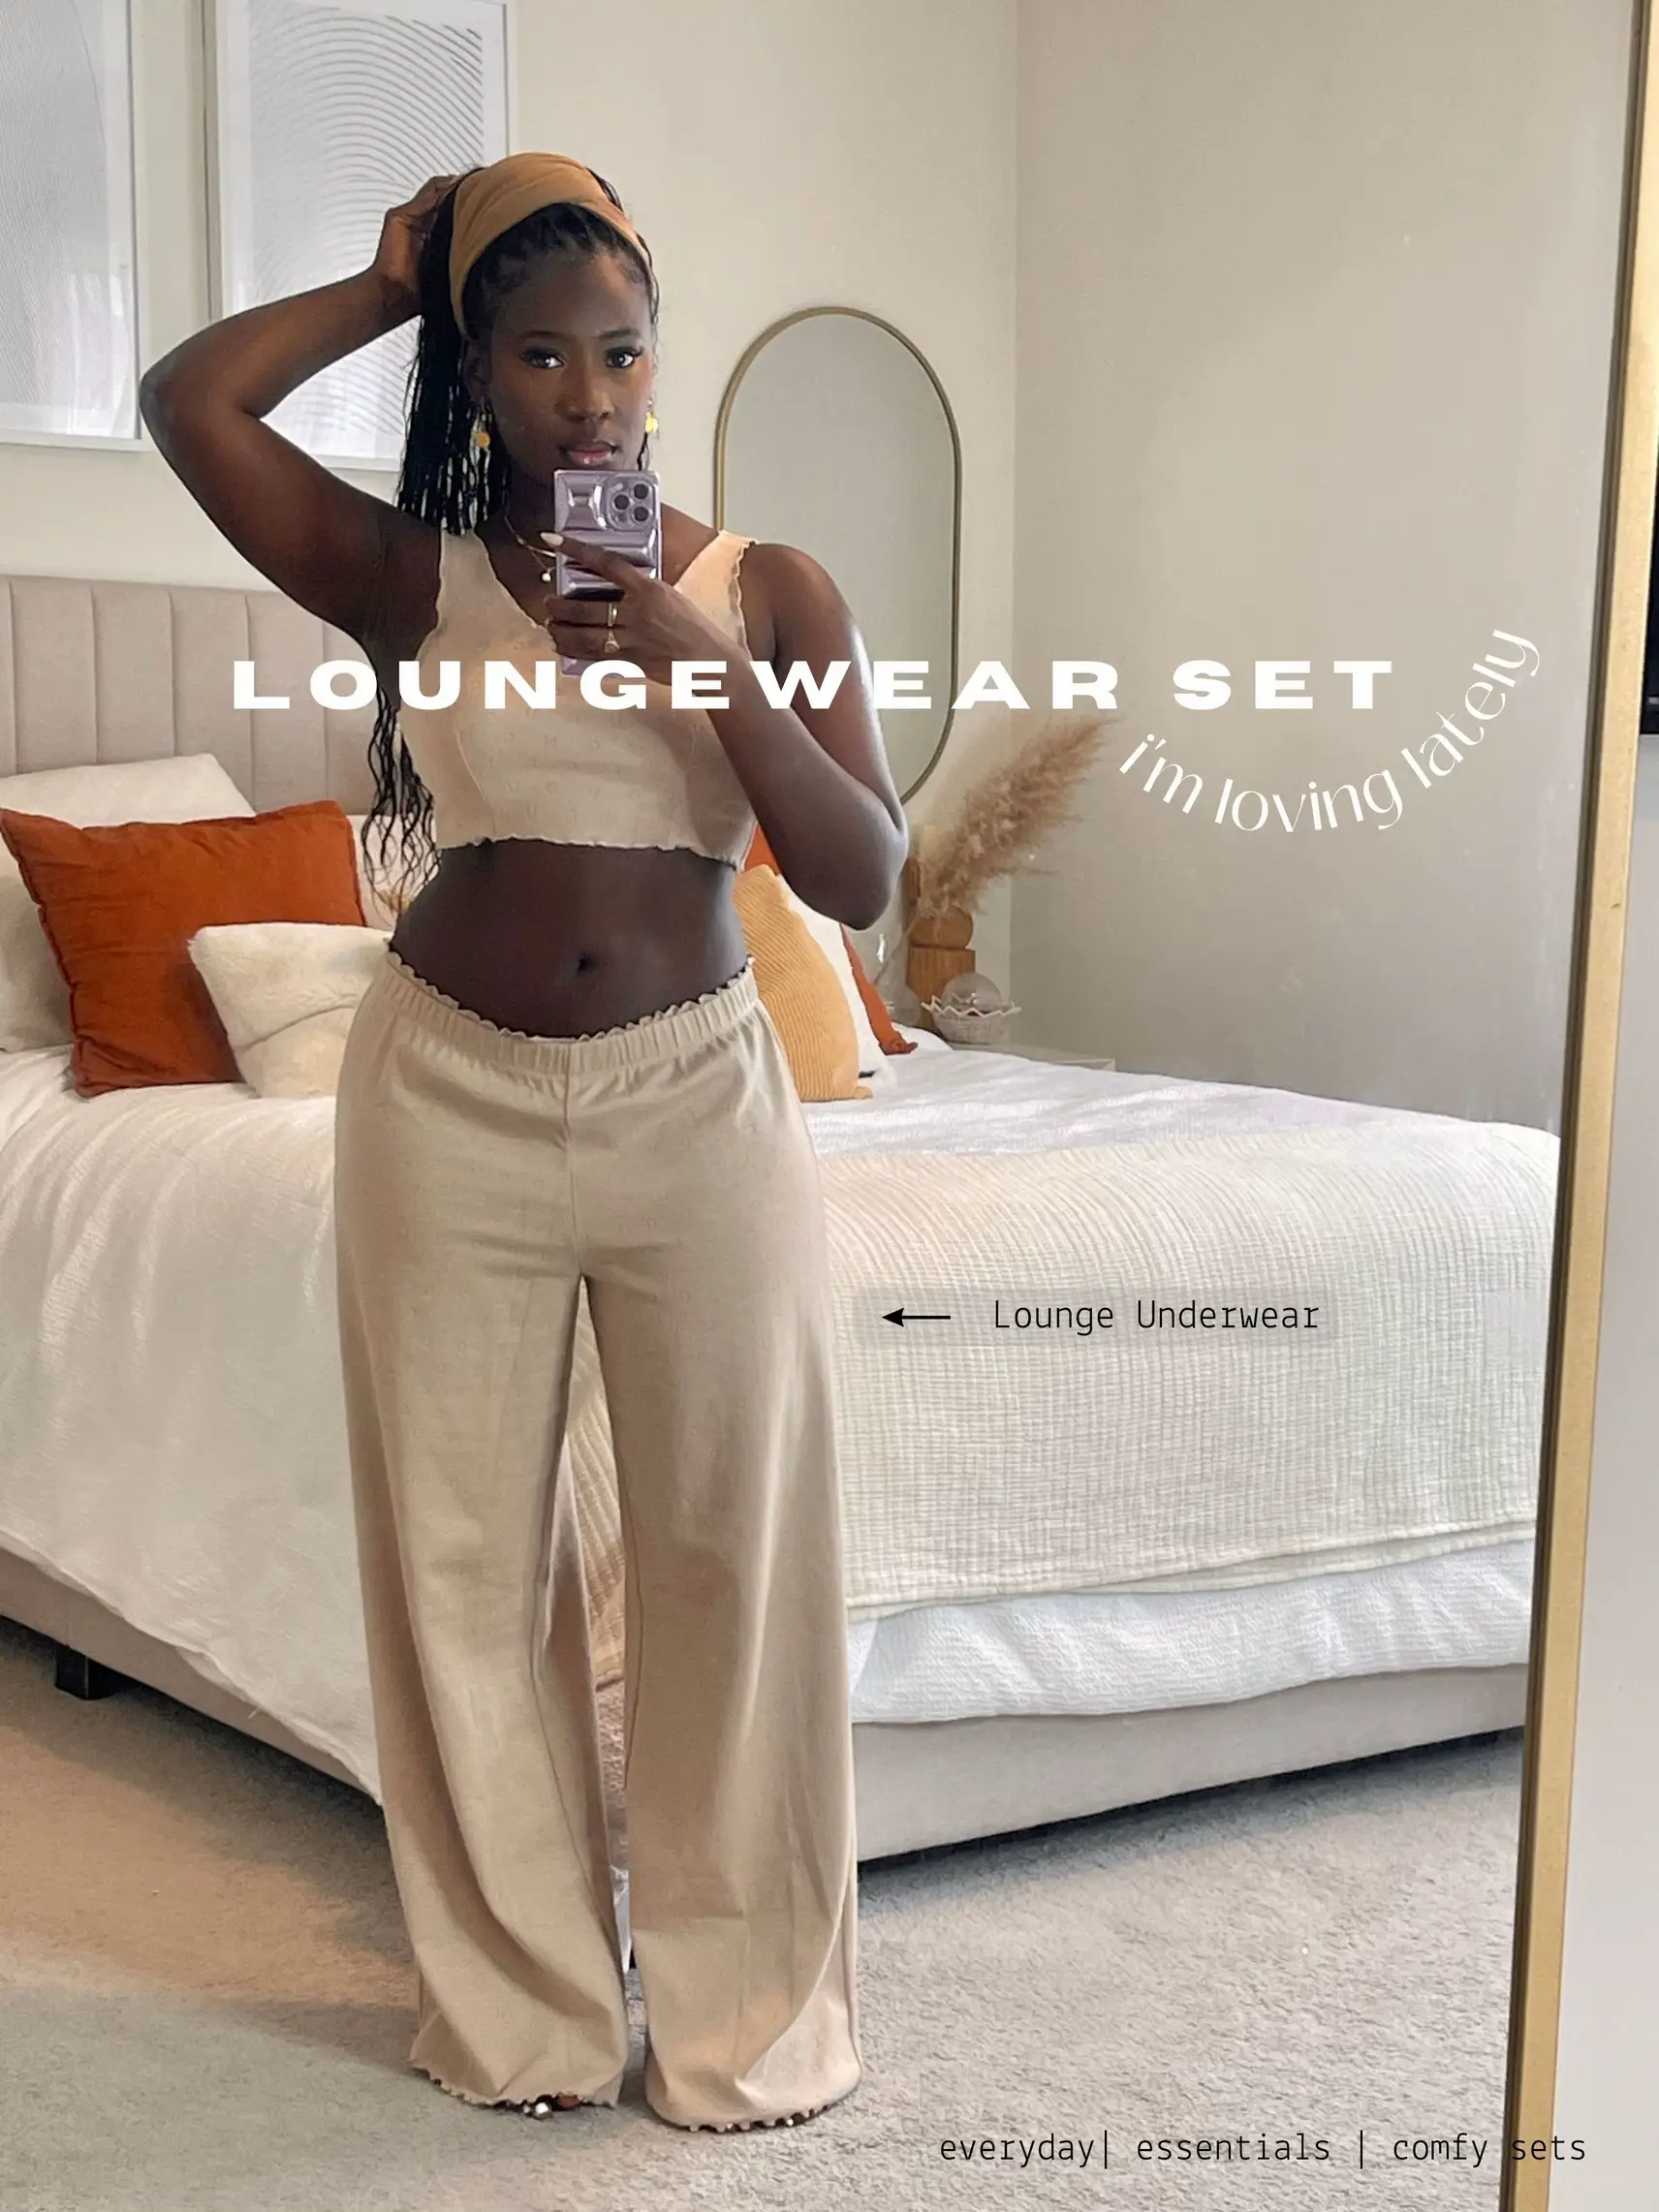 Lounge Underwear Us: Our Story 🏡✨